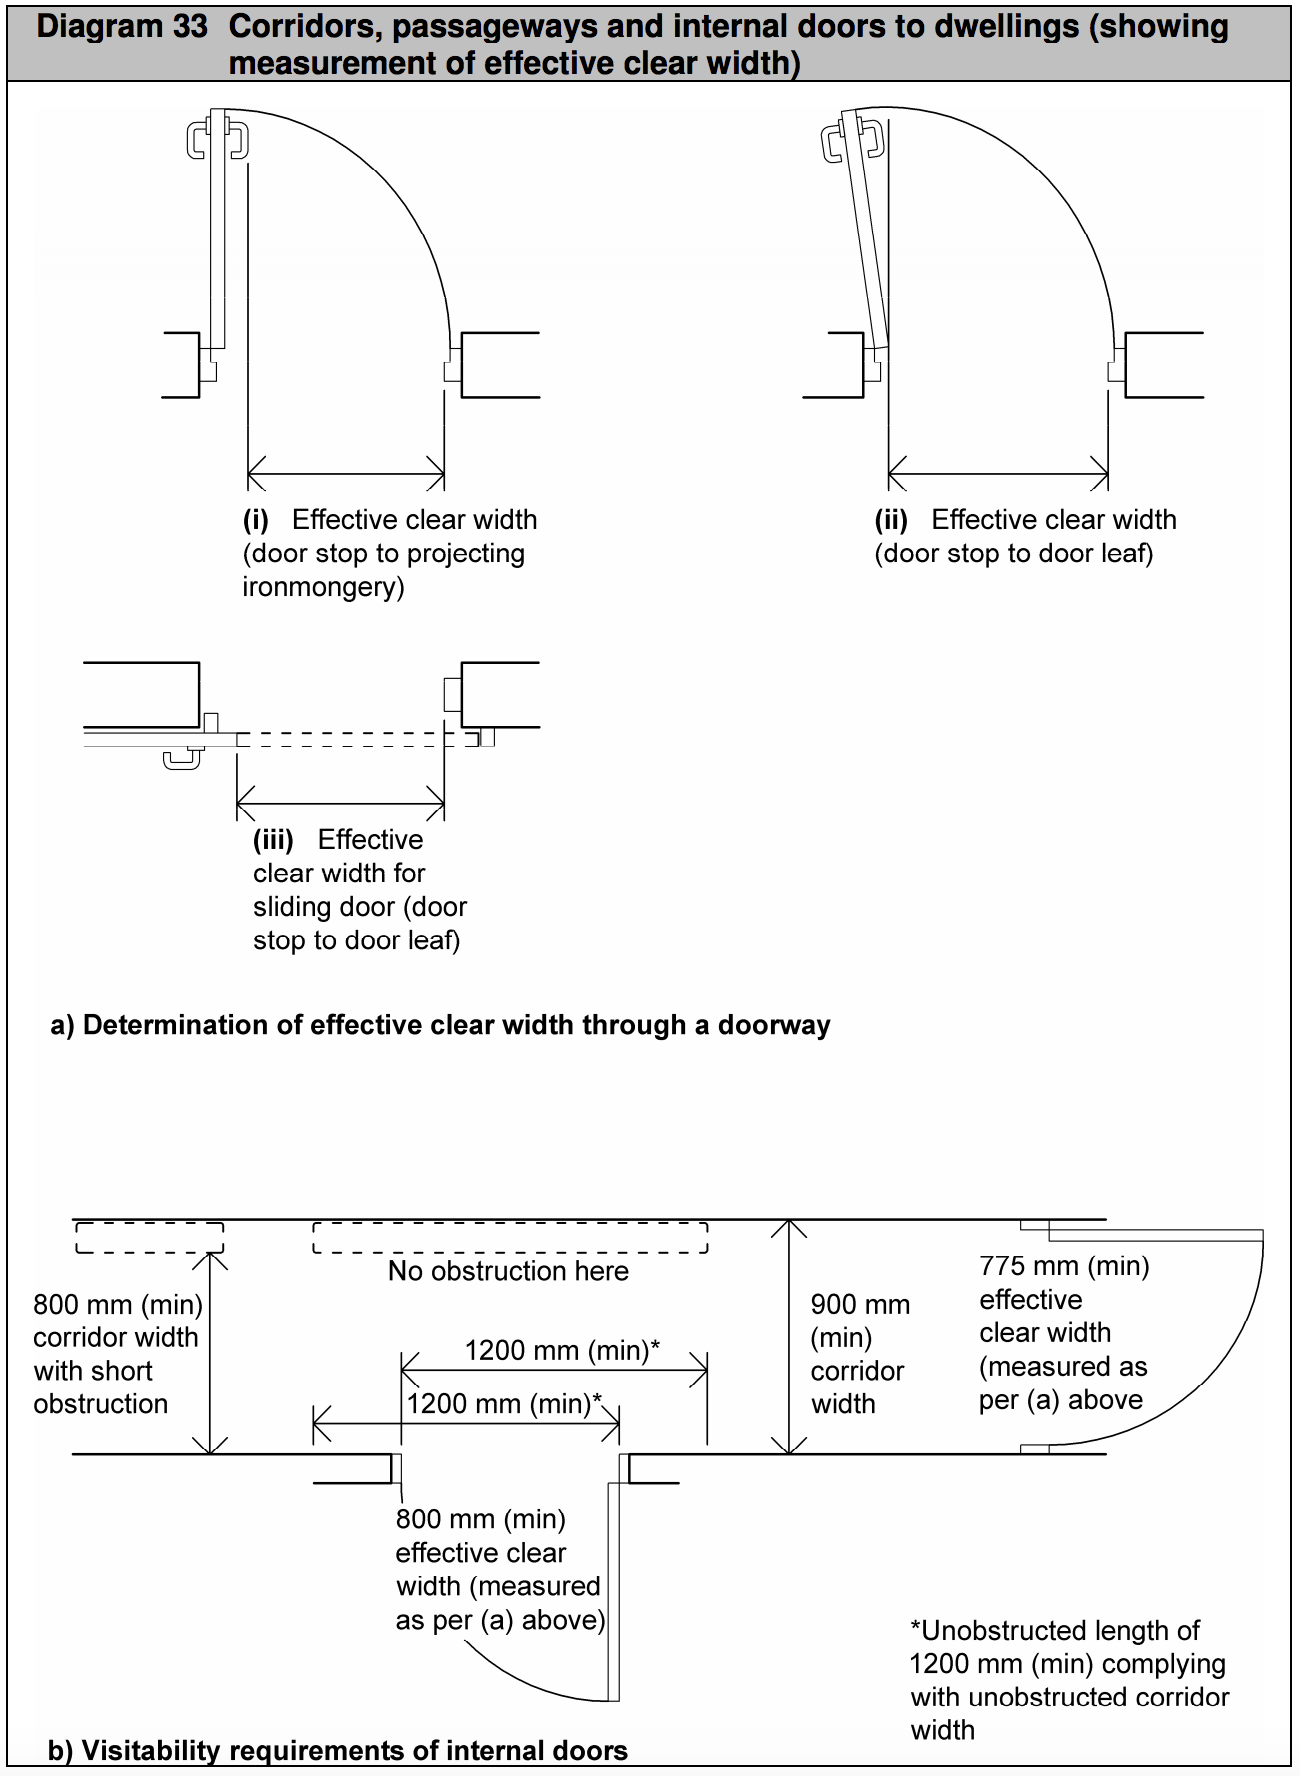 Diagram HM2 - Corridors, passageways and internal doors to dwellings (showing measurement of effective clear width)- Extract from TGD M